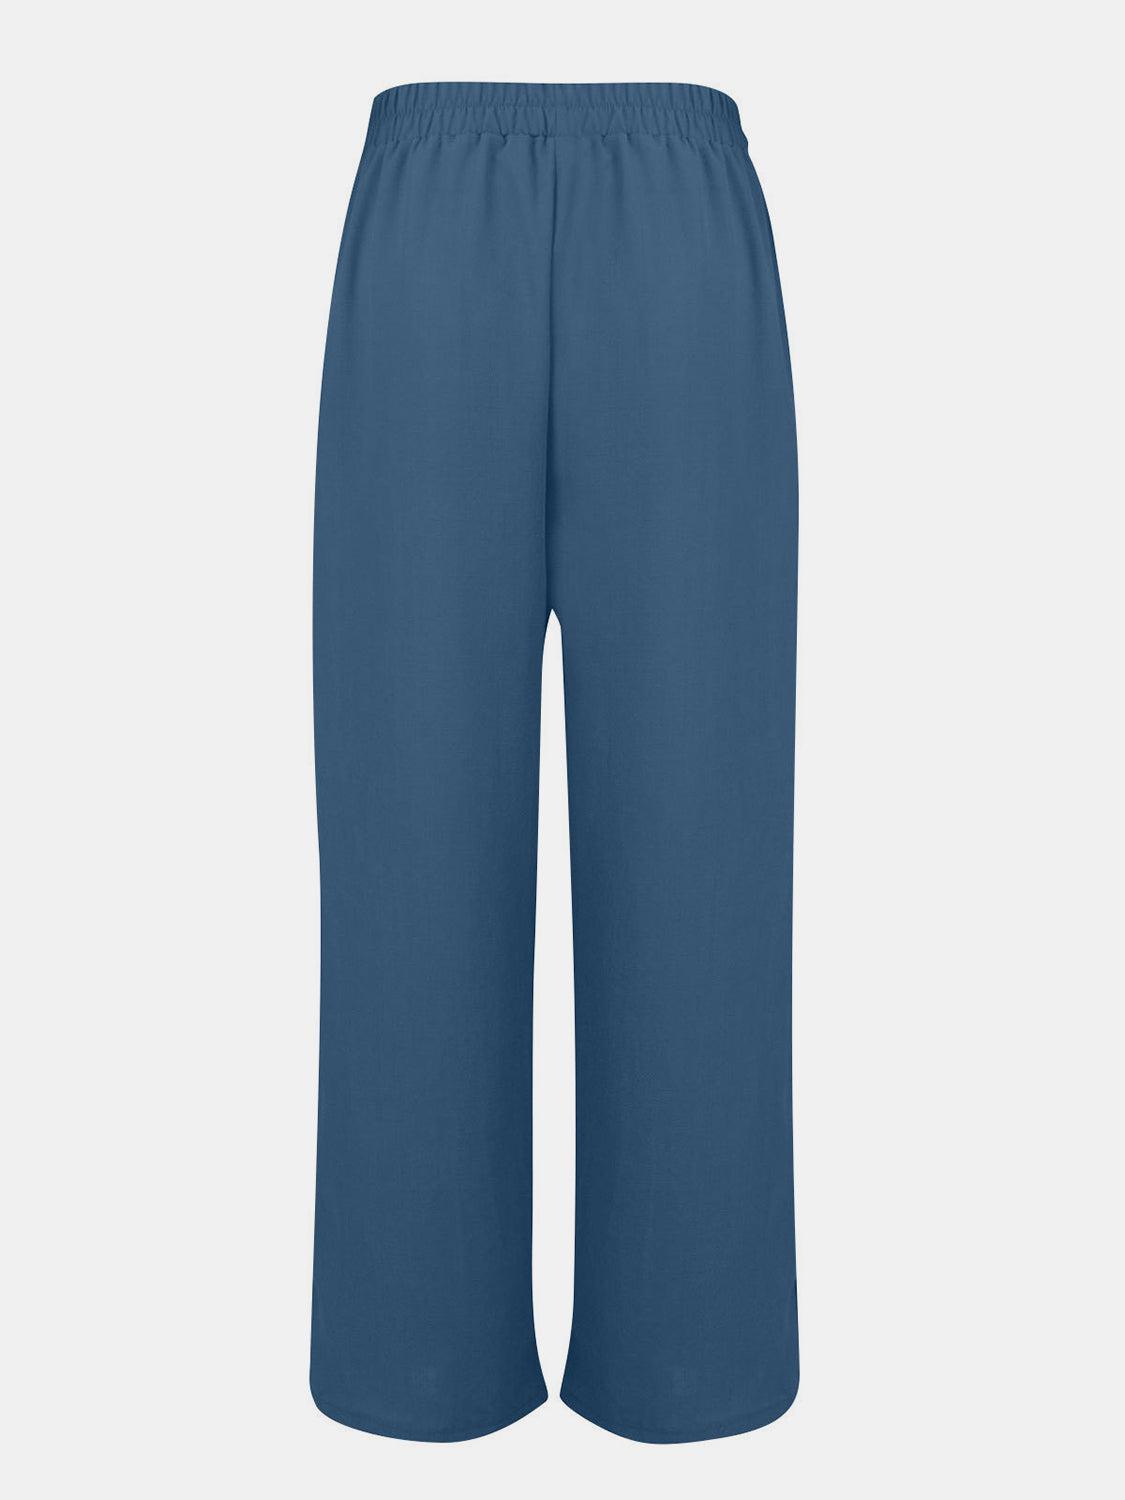 a women's blue pants with a side slit